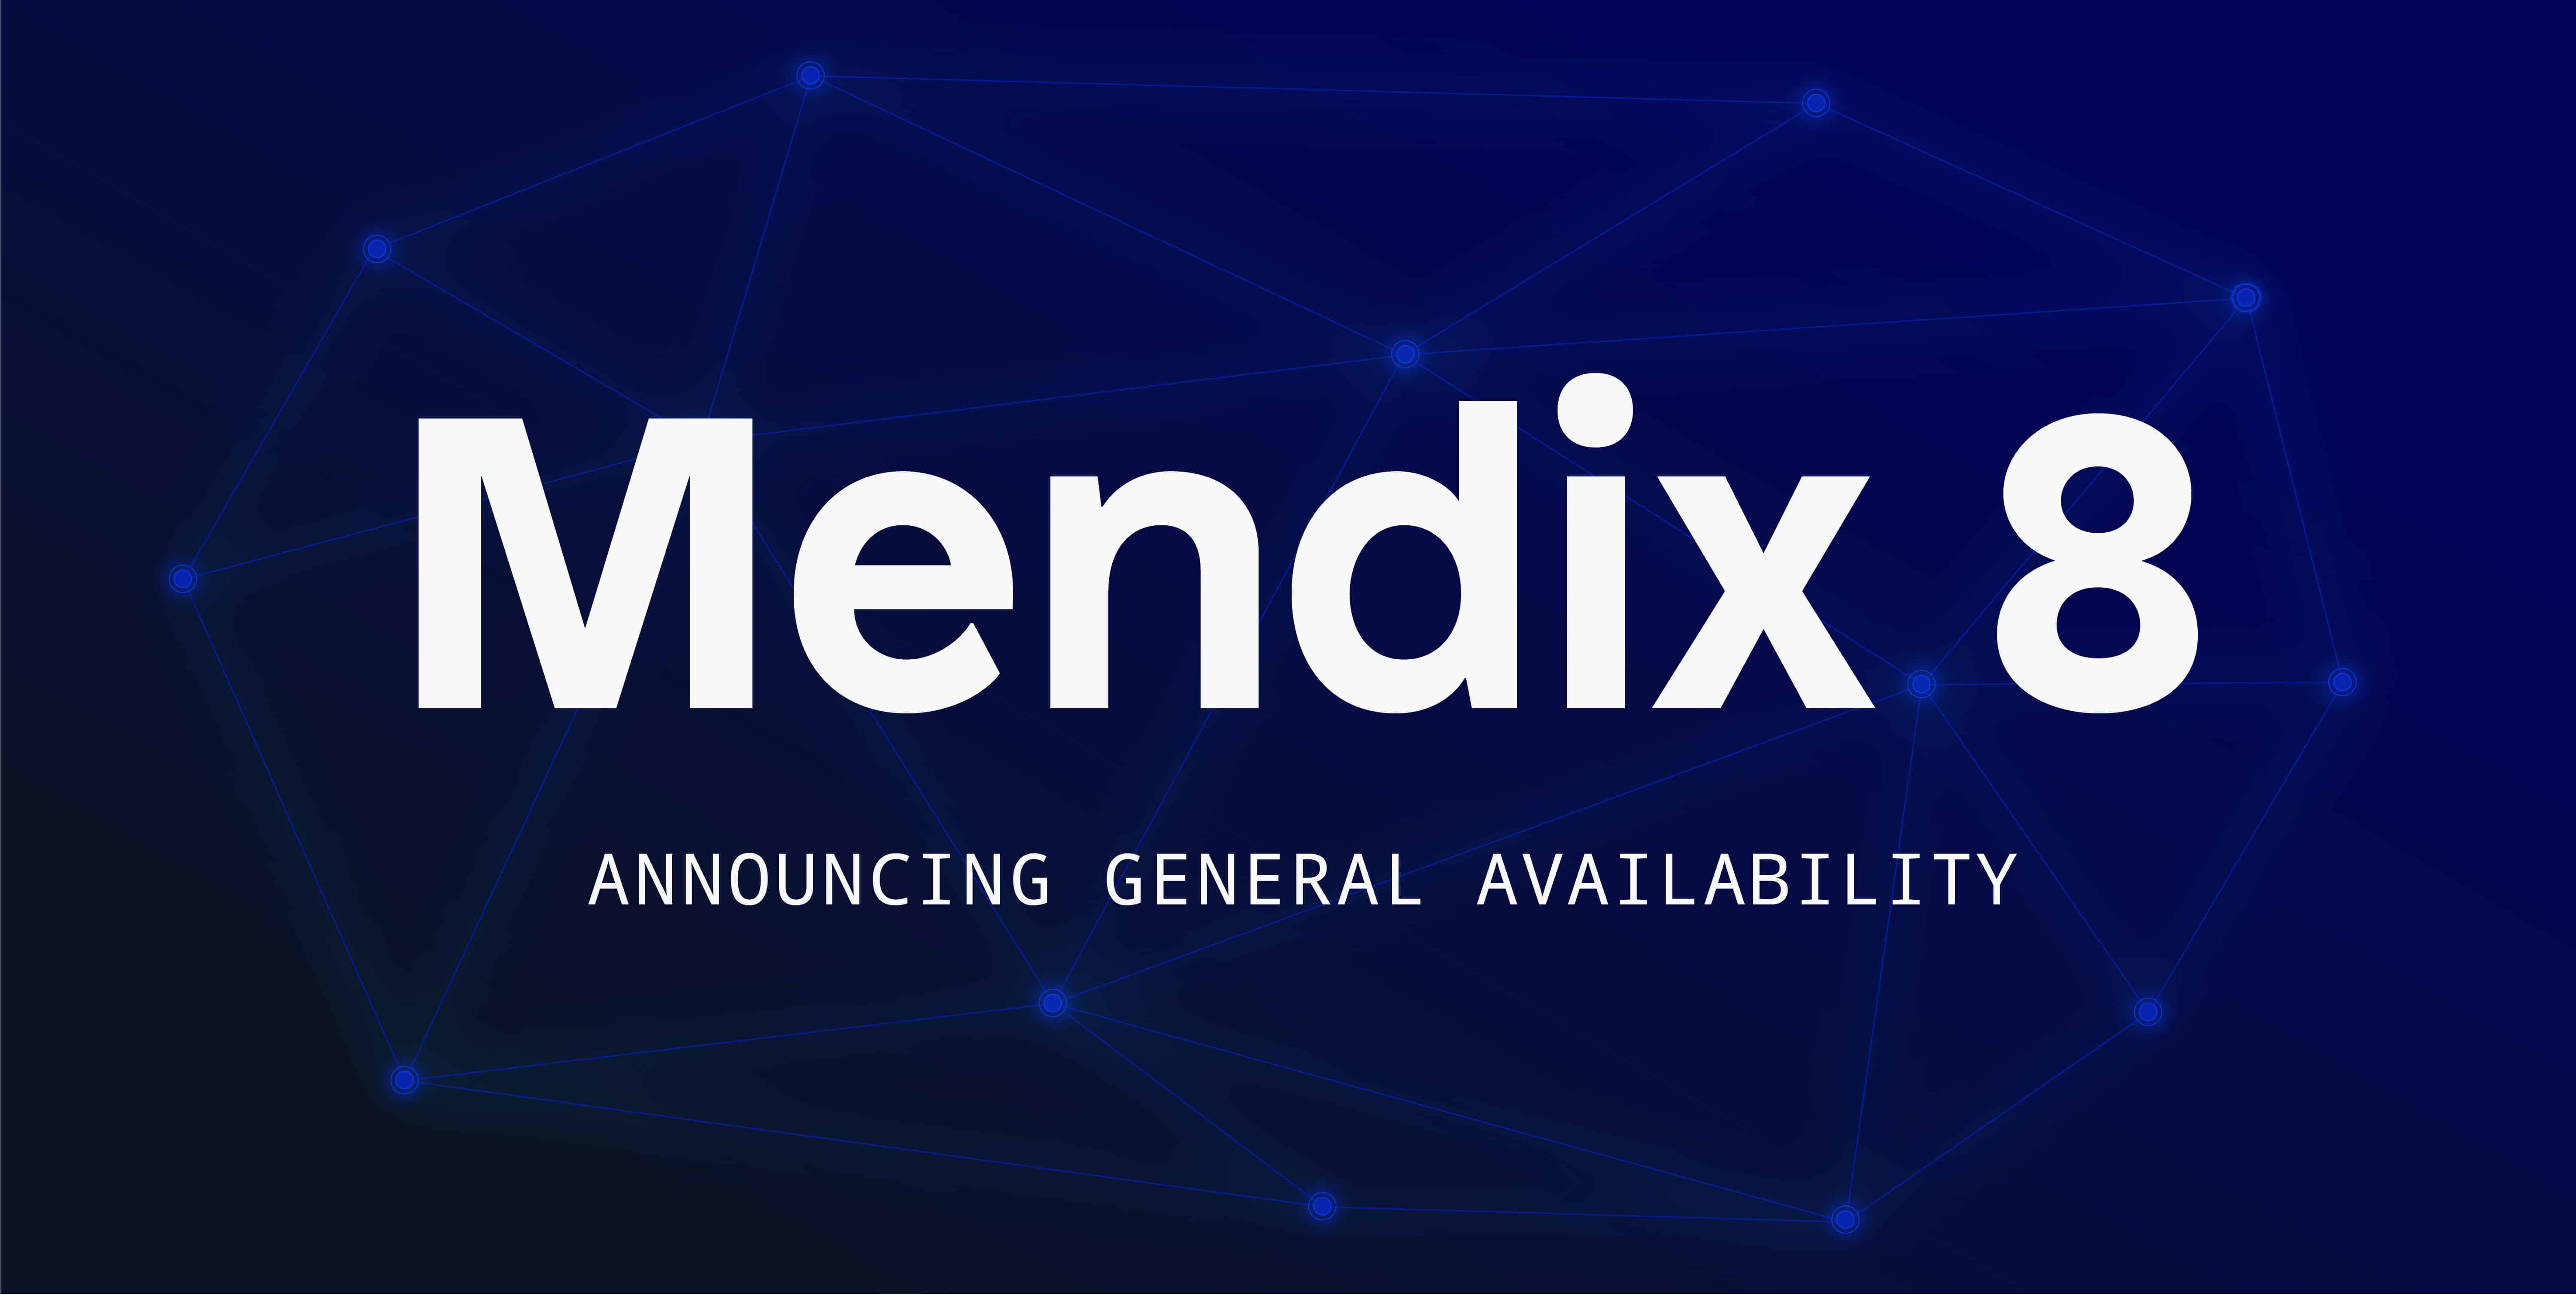 General availability of Mendix 8 is here.